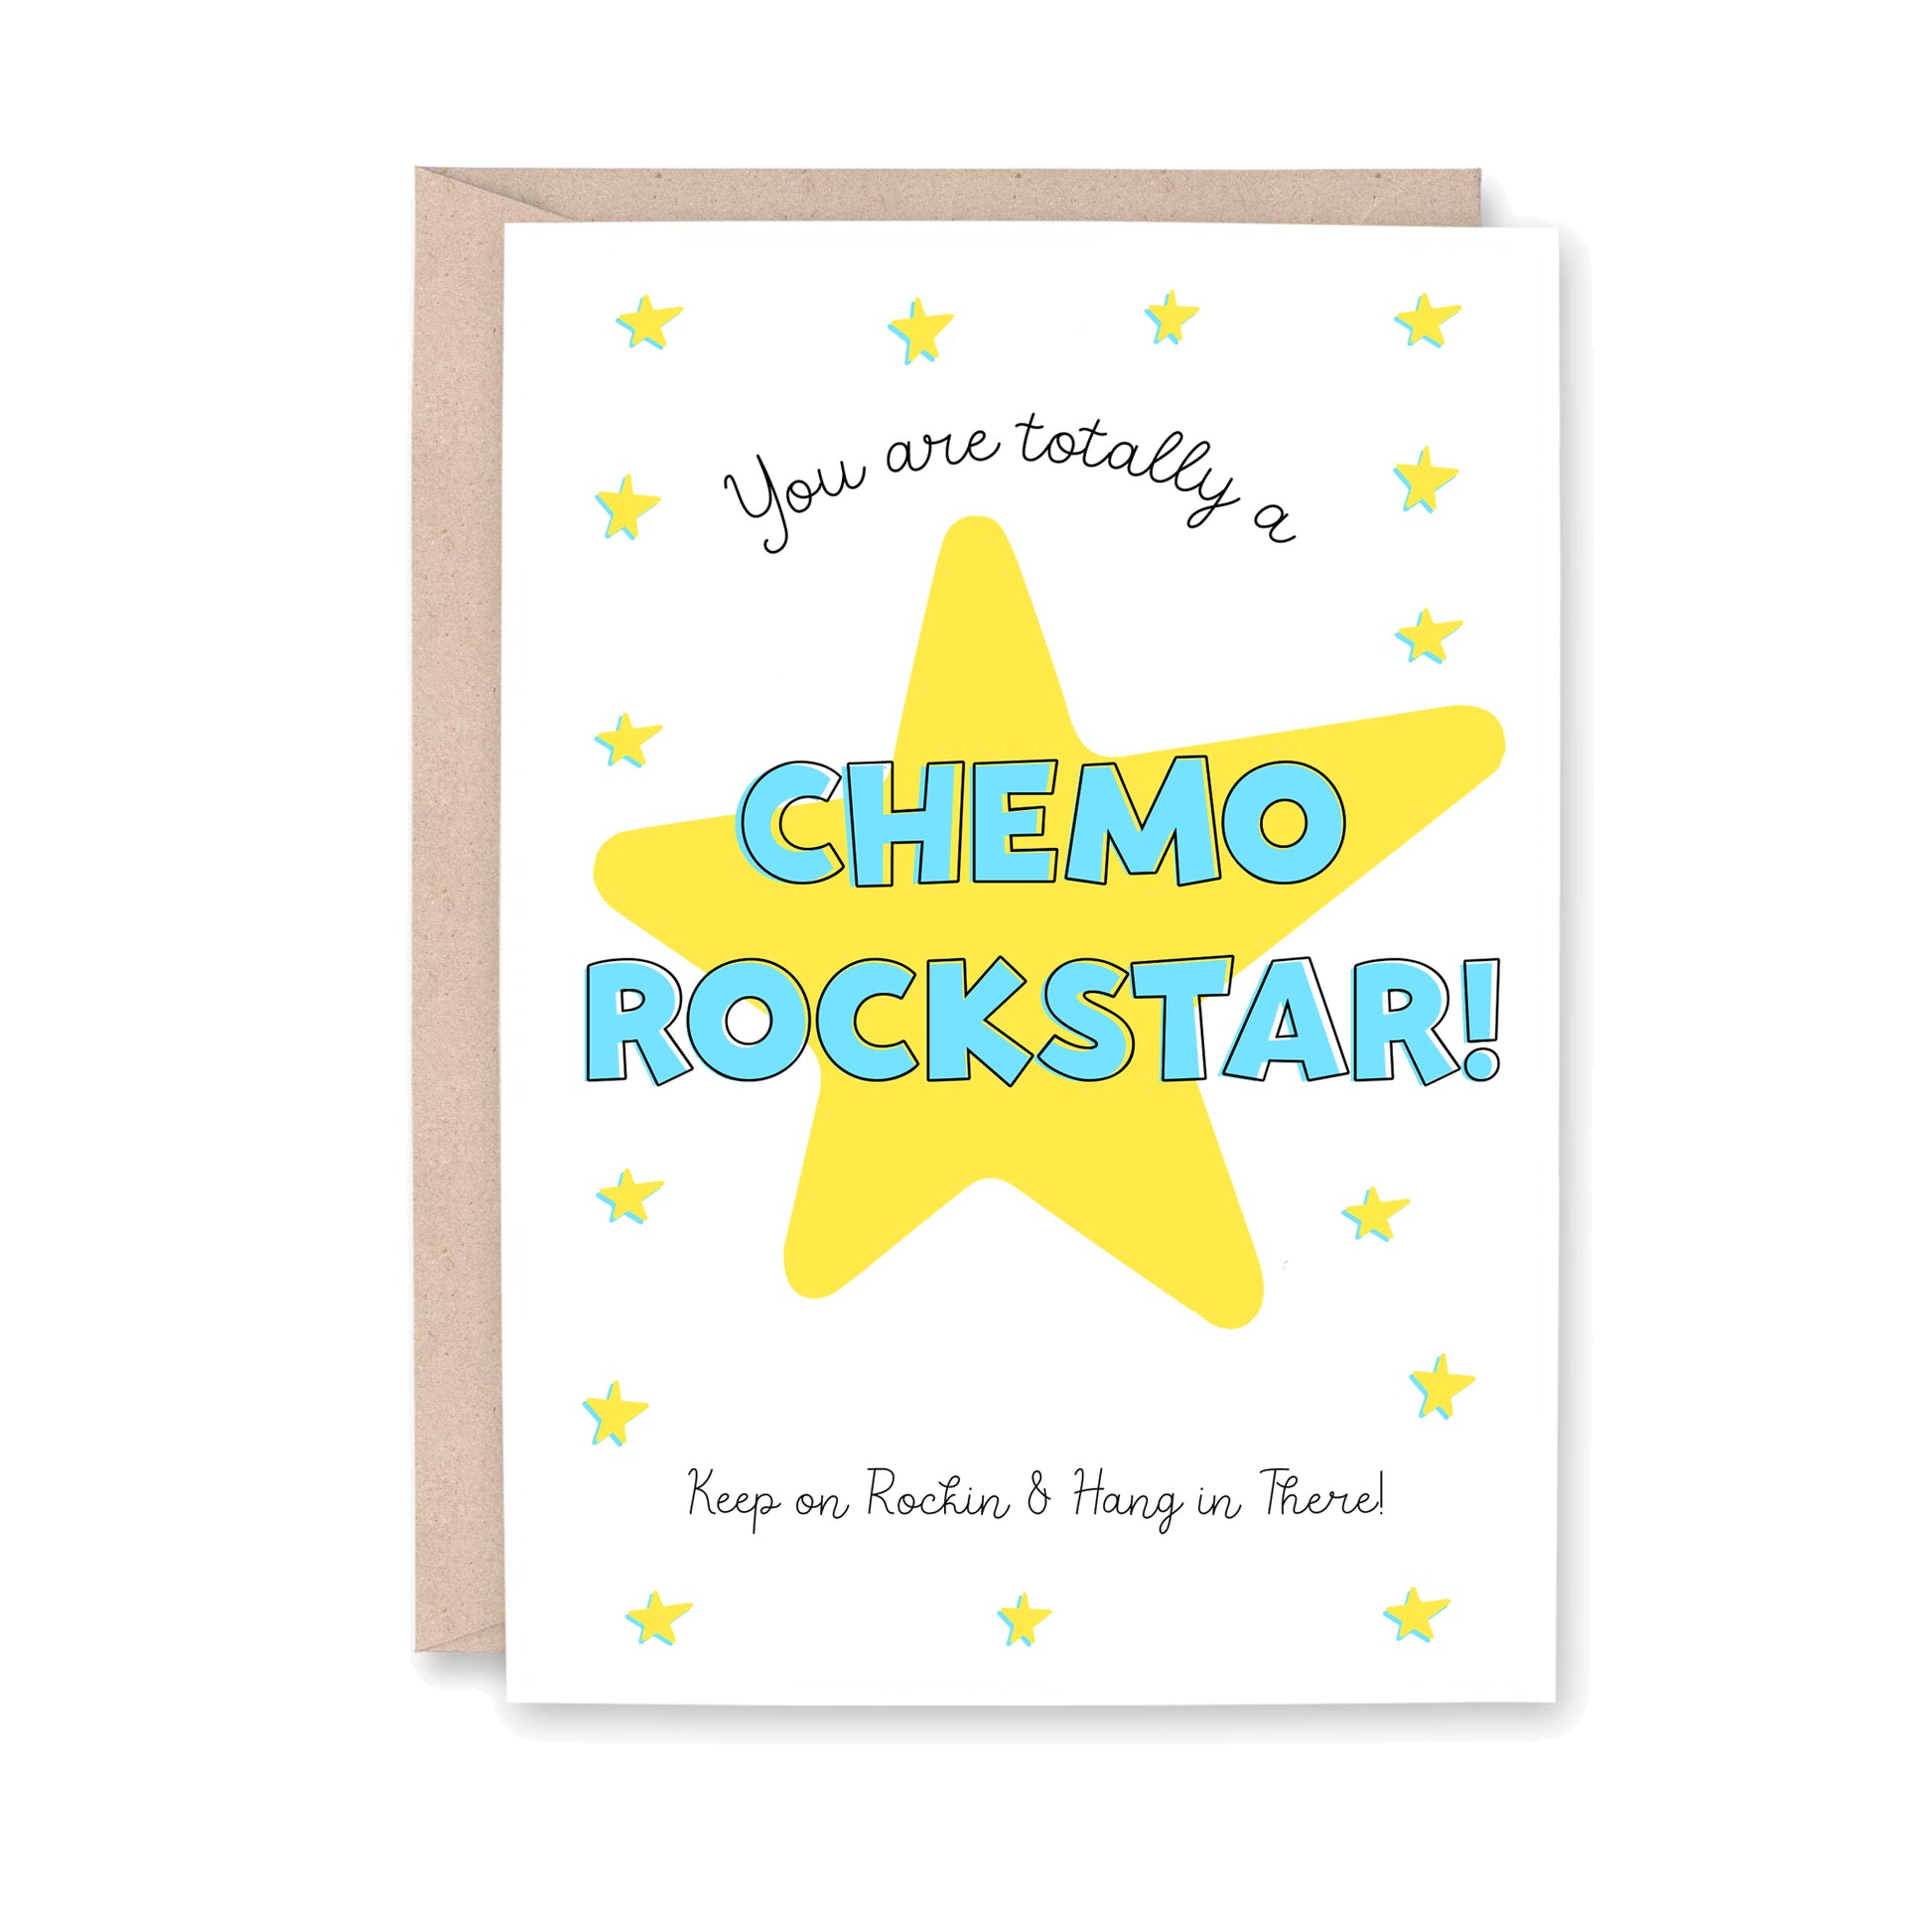 Greeting card with yellow stars and text that says "You are totally a CHEMO ROCKSTAR! Keep on Rockin & Hang in There!"